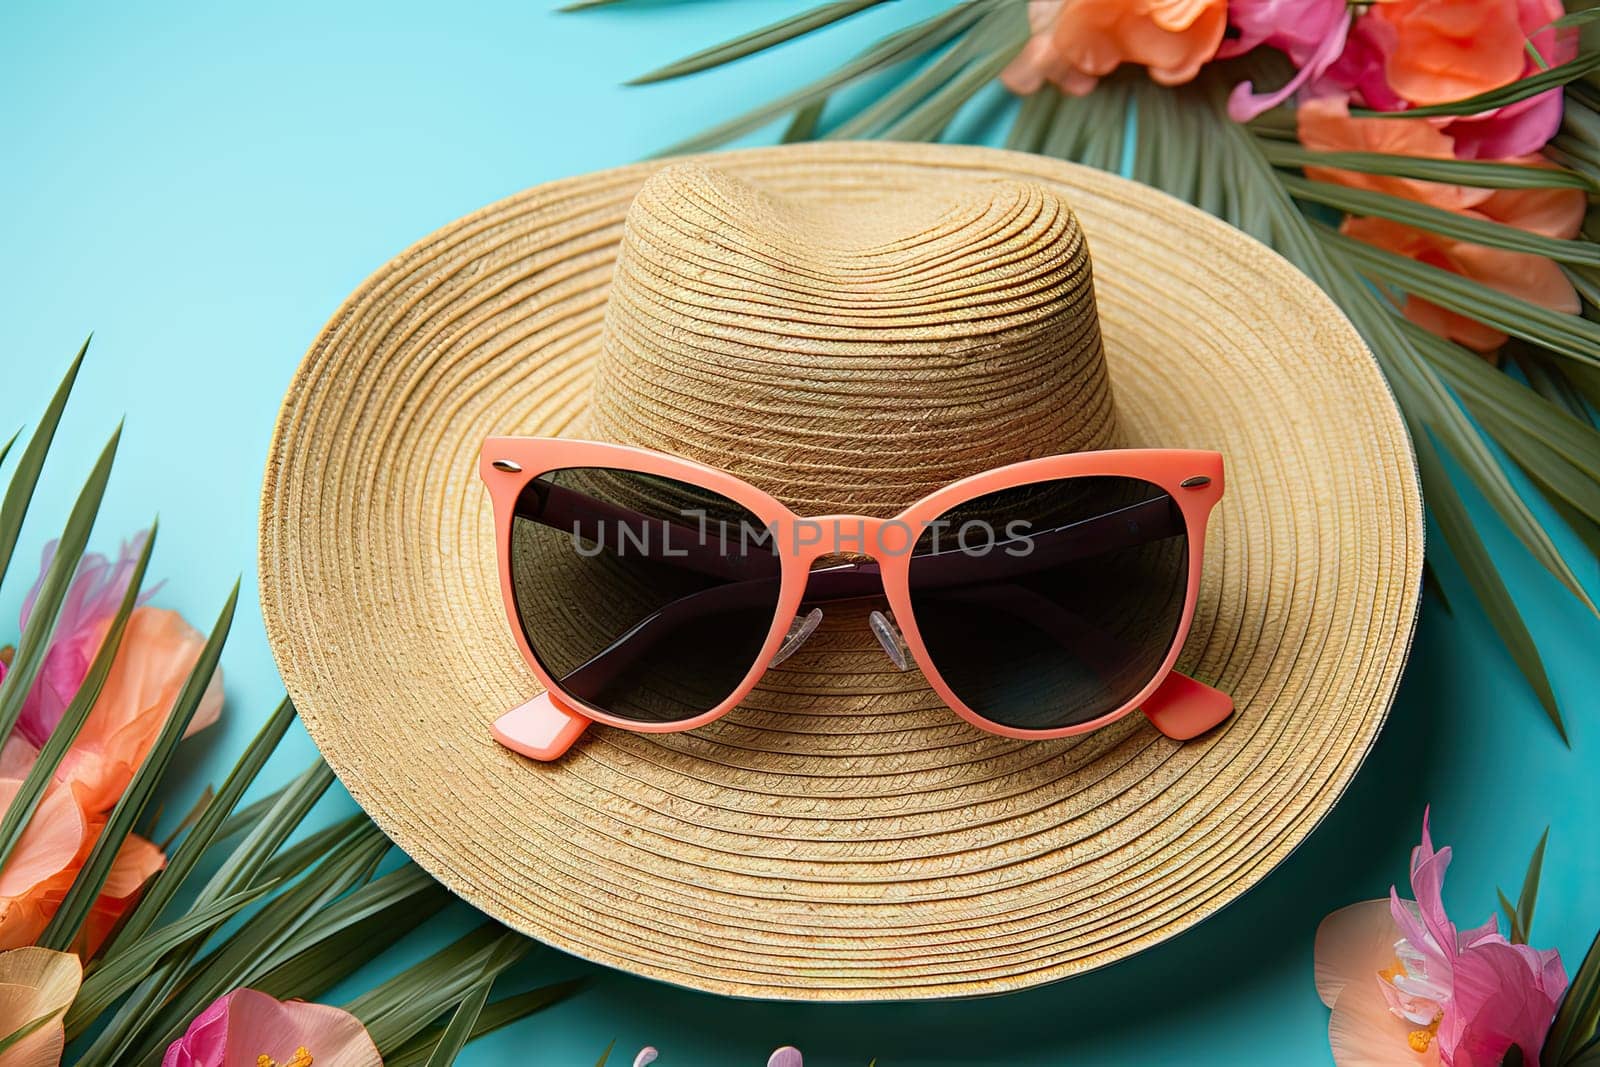 A Fashionable Summer Ensemble: Hat, Sunglasses, and Flowers on a Vibrant Blue Background